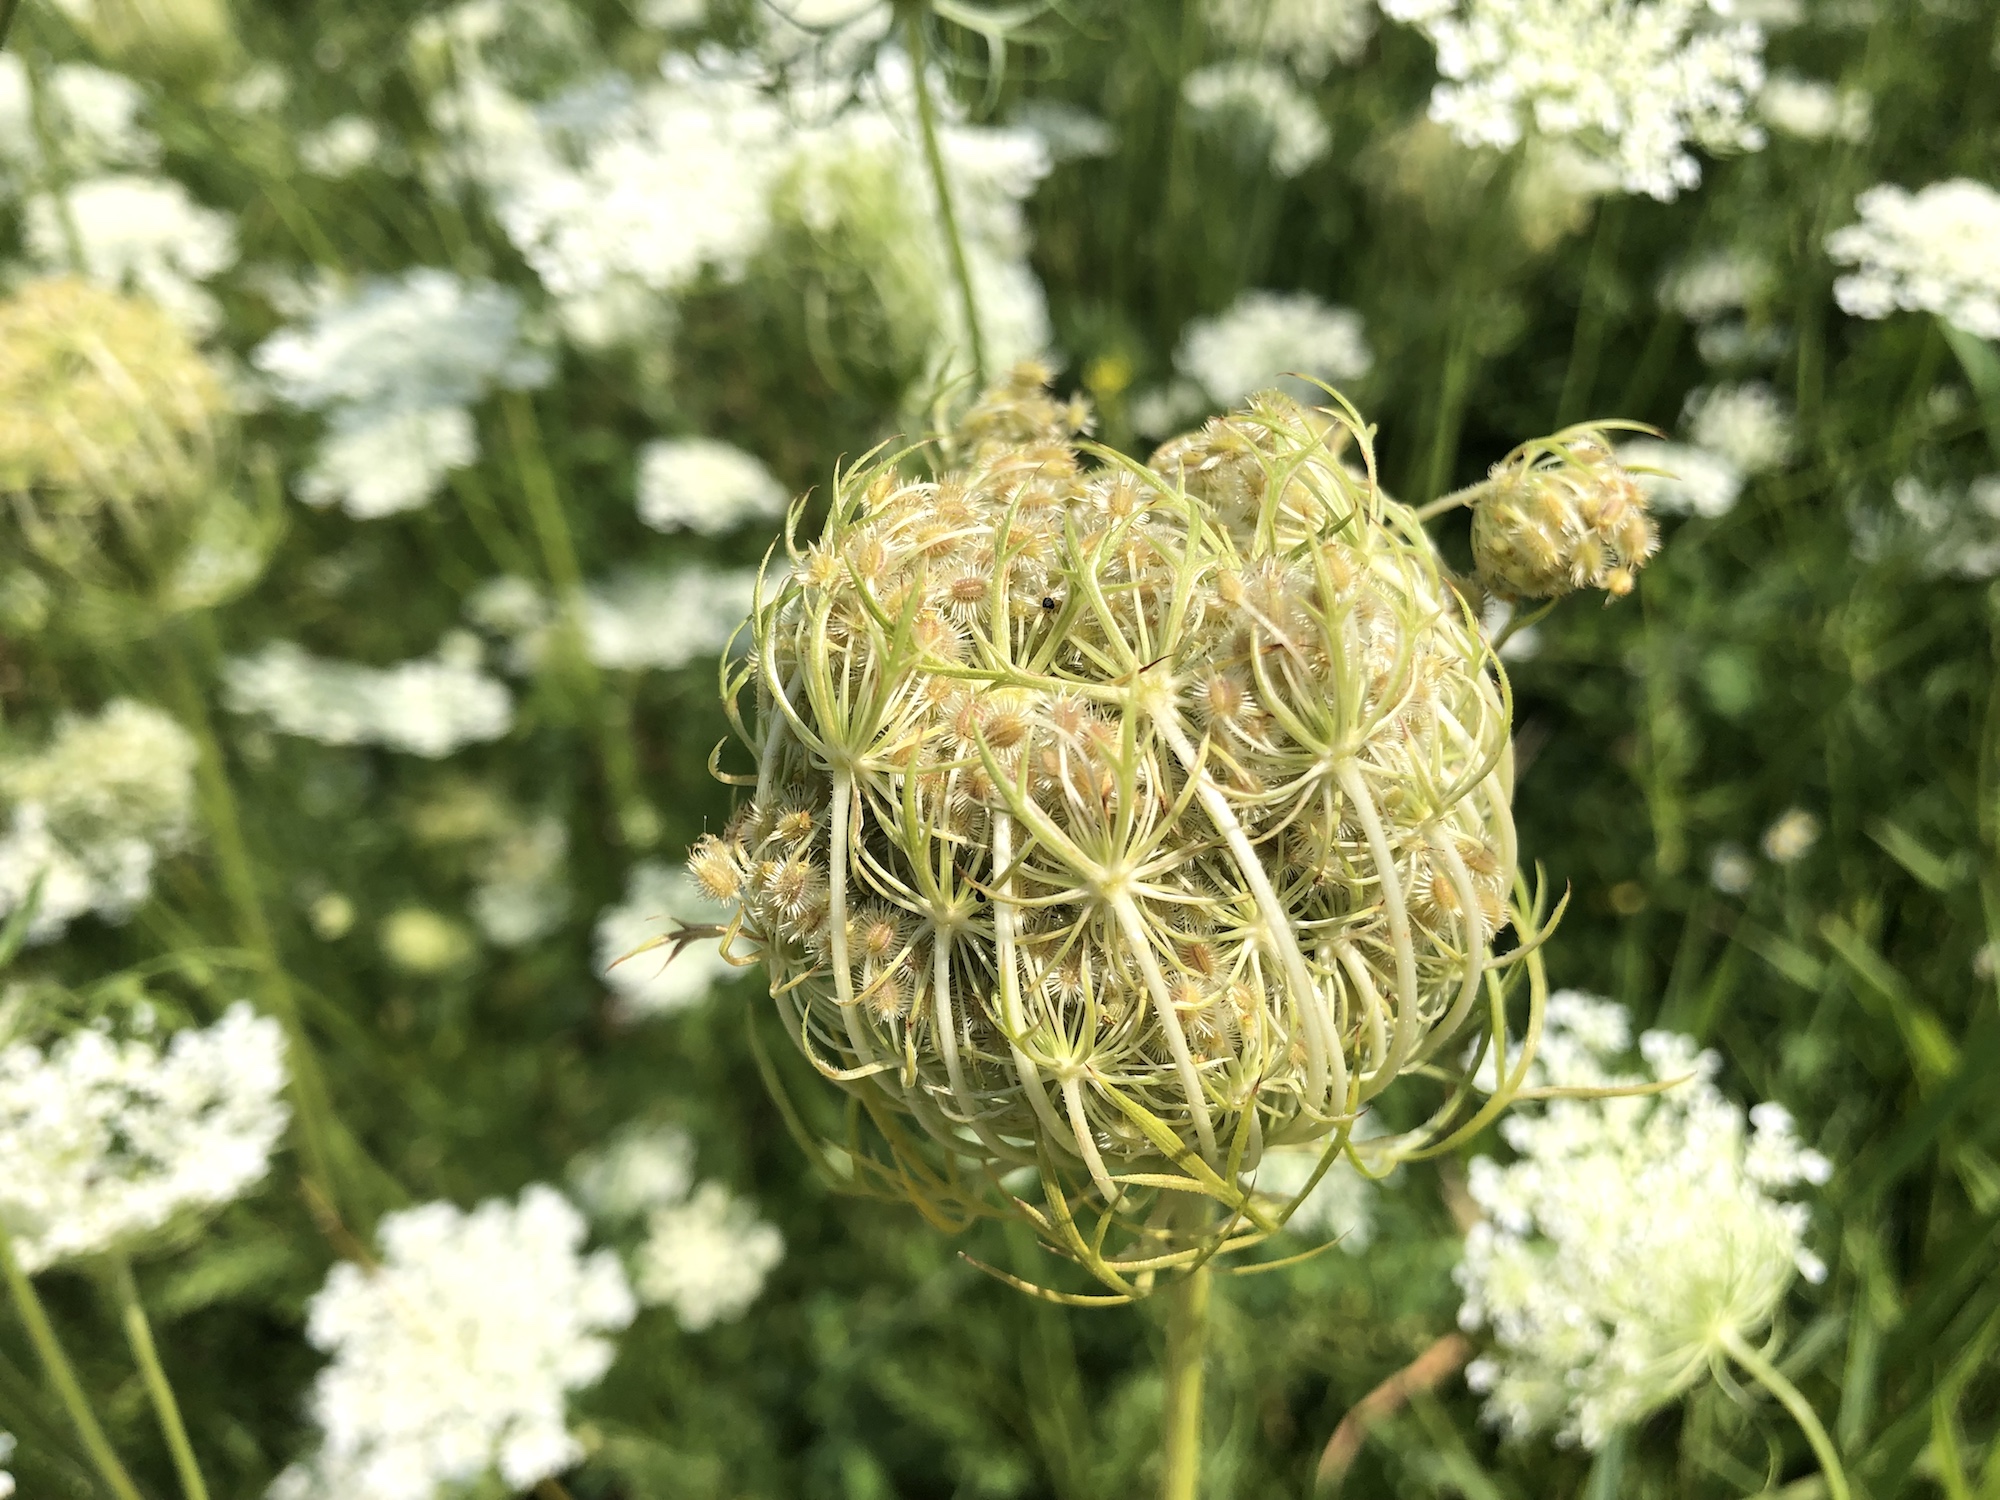 Queen Anne's Lace on bank of retaining pond on the corner of Nakoma Road and Manitou Way in Madison, WI on July 27, 2019.